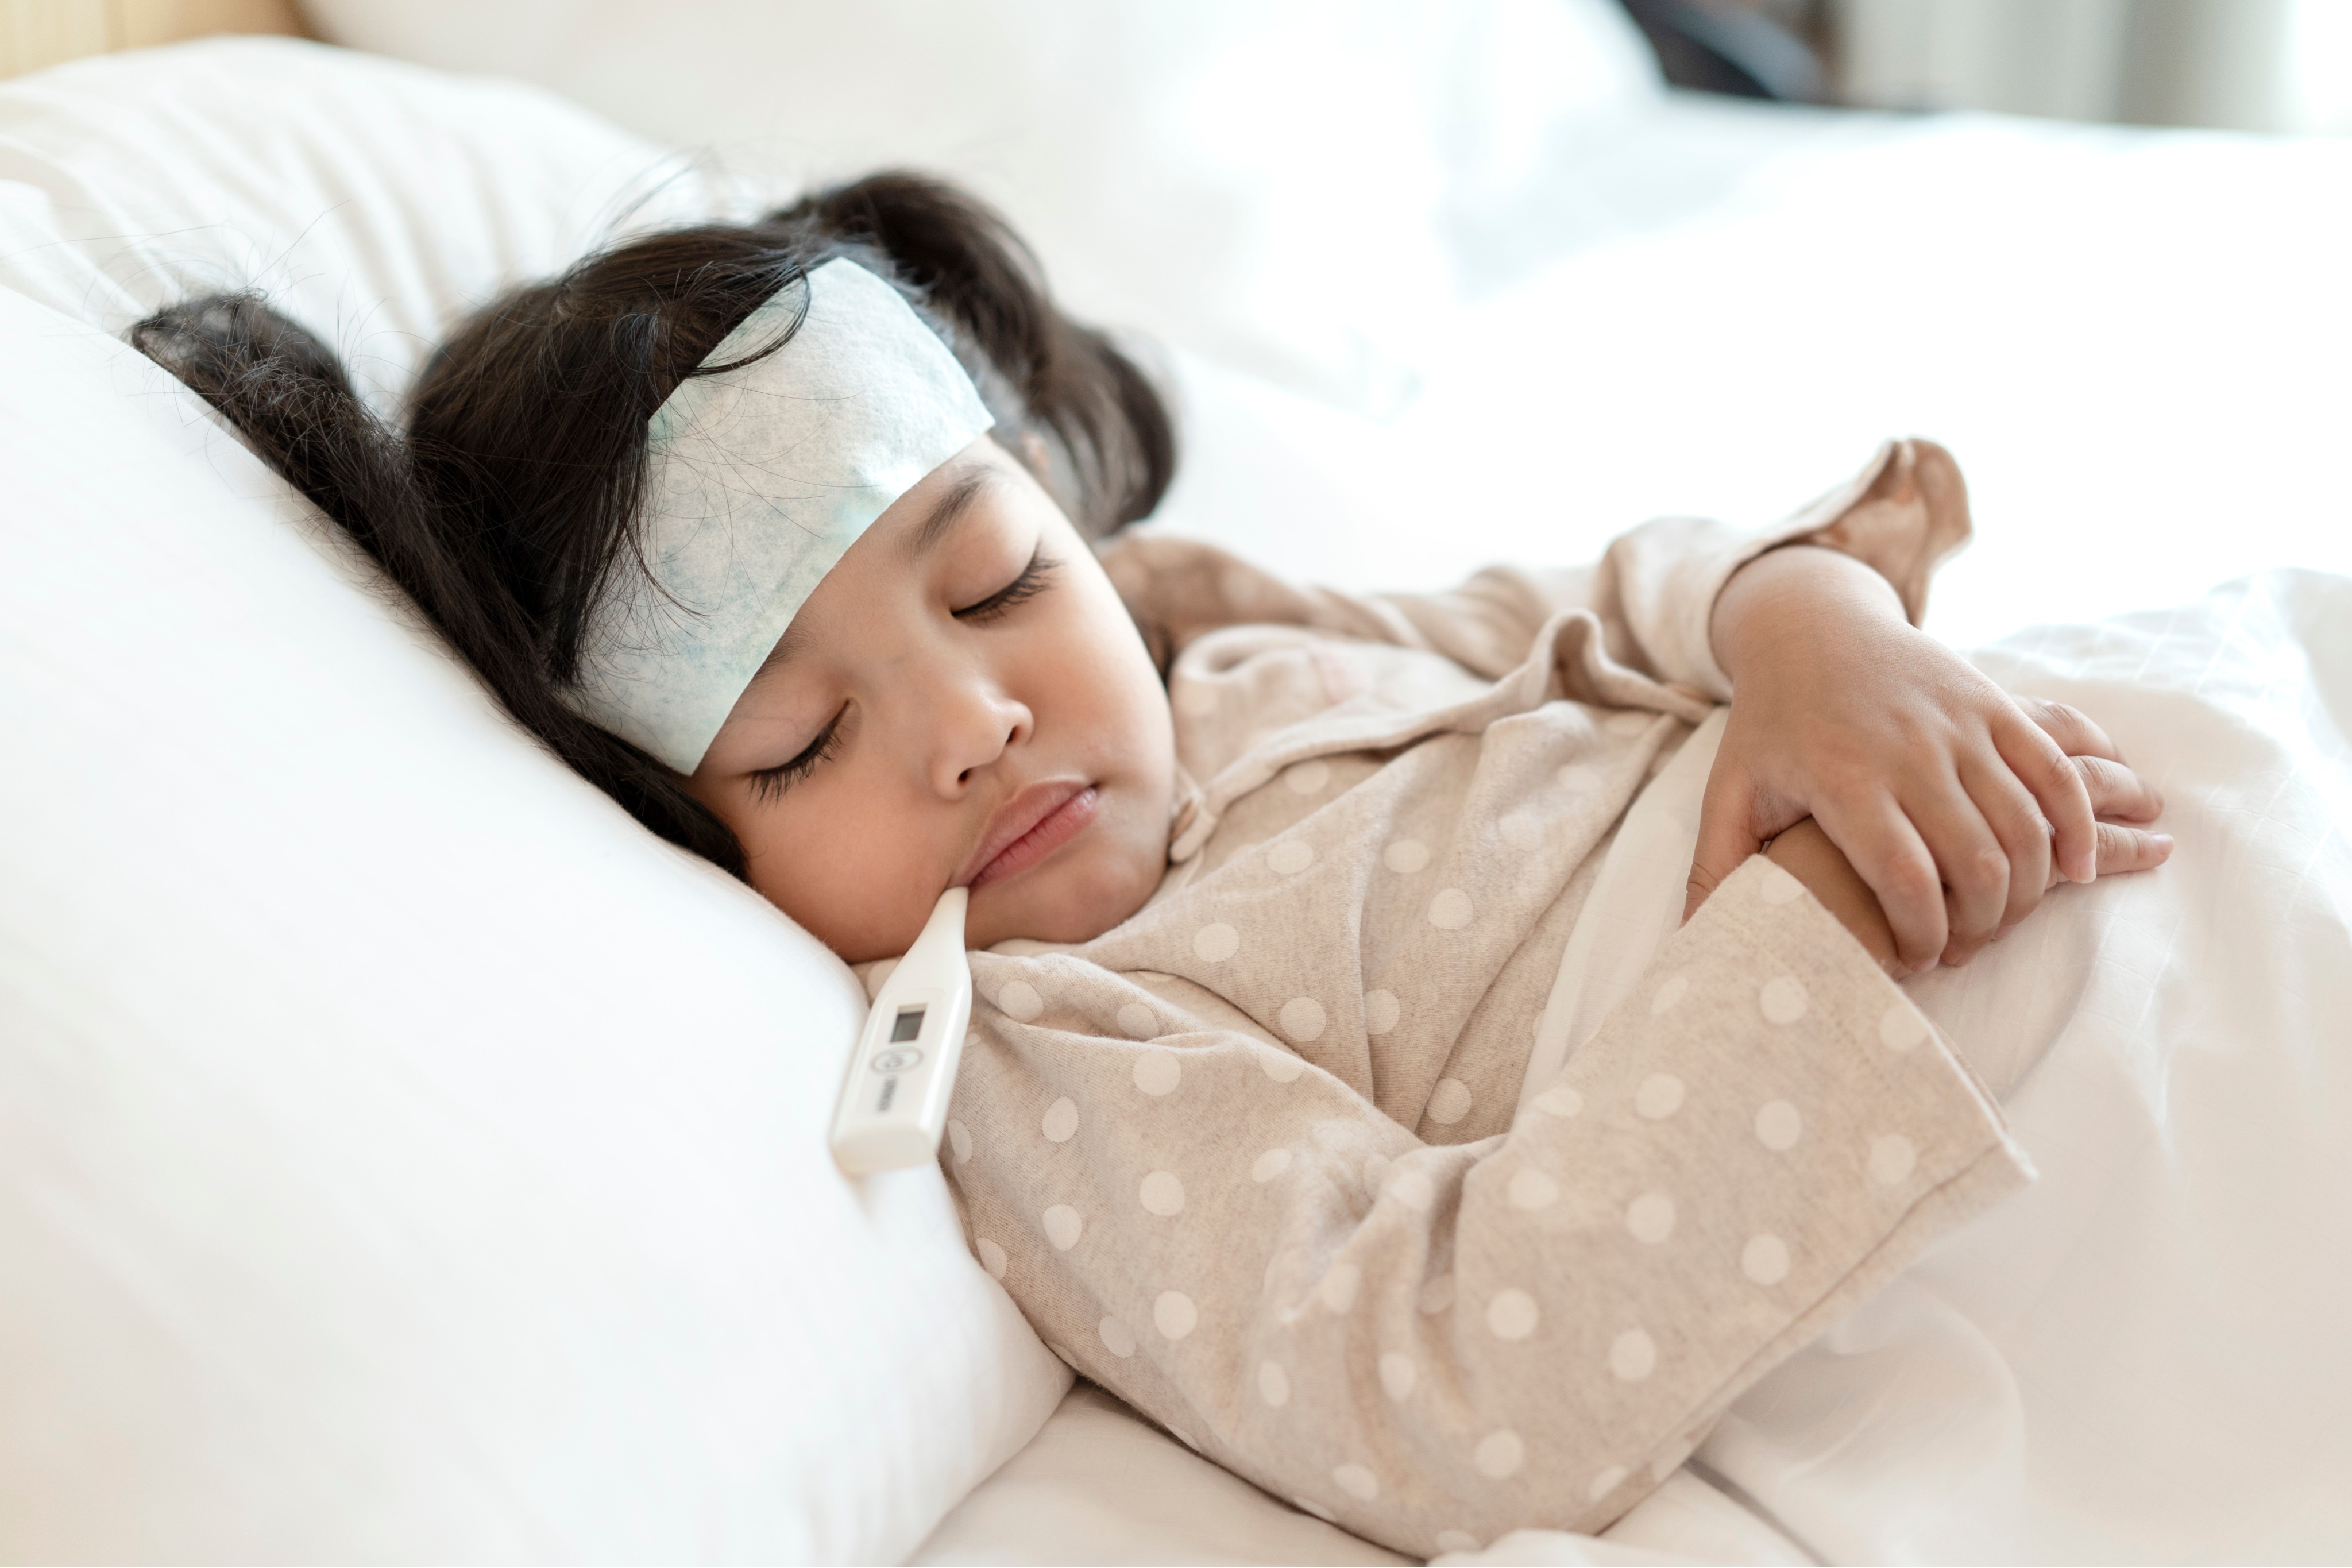 
Fevers don’t have to be scary. Here’s how to help your child when they come down with a fever.